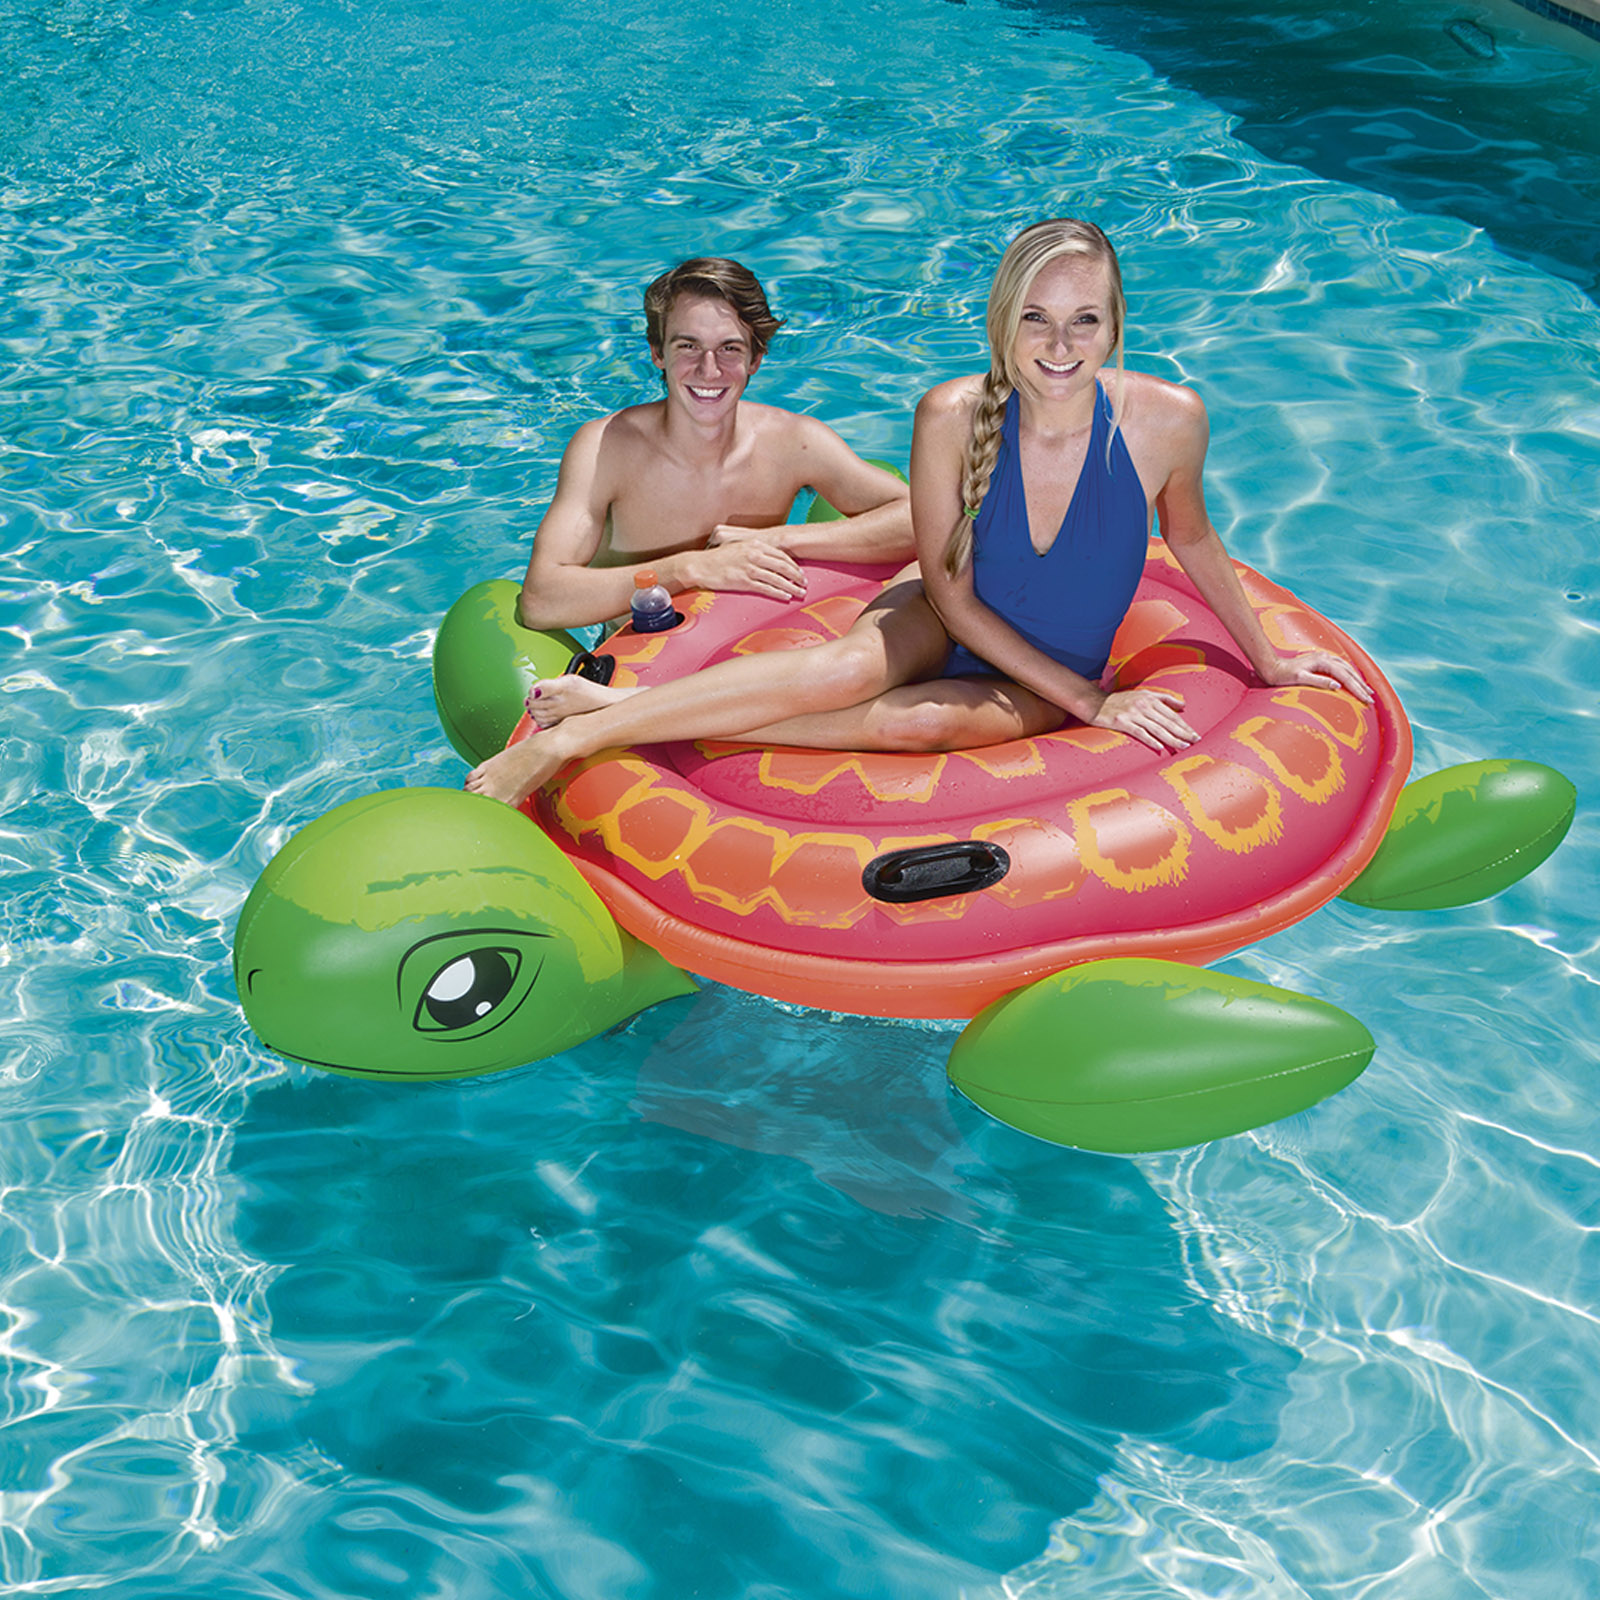 BESTWAY. COOLERZ. TORTUGA INFLABLE GRANDE CON ASAS 186 X 170 CM